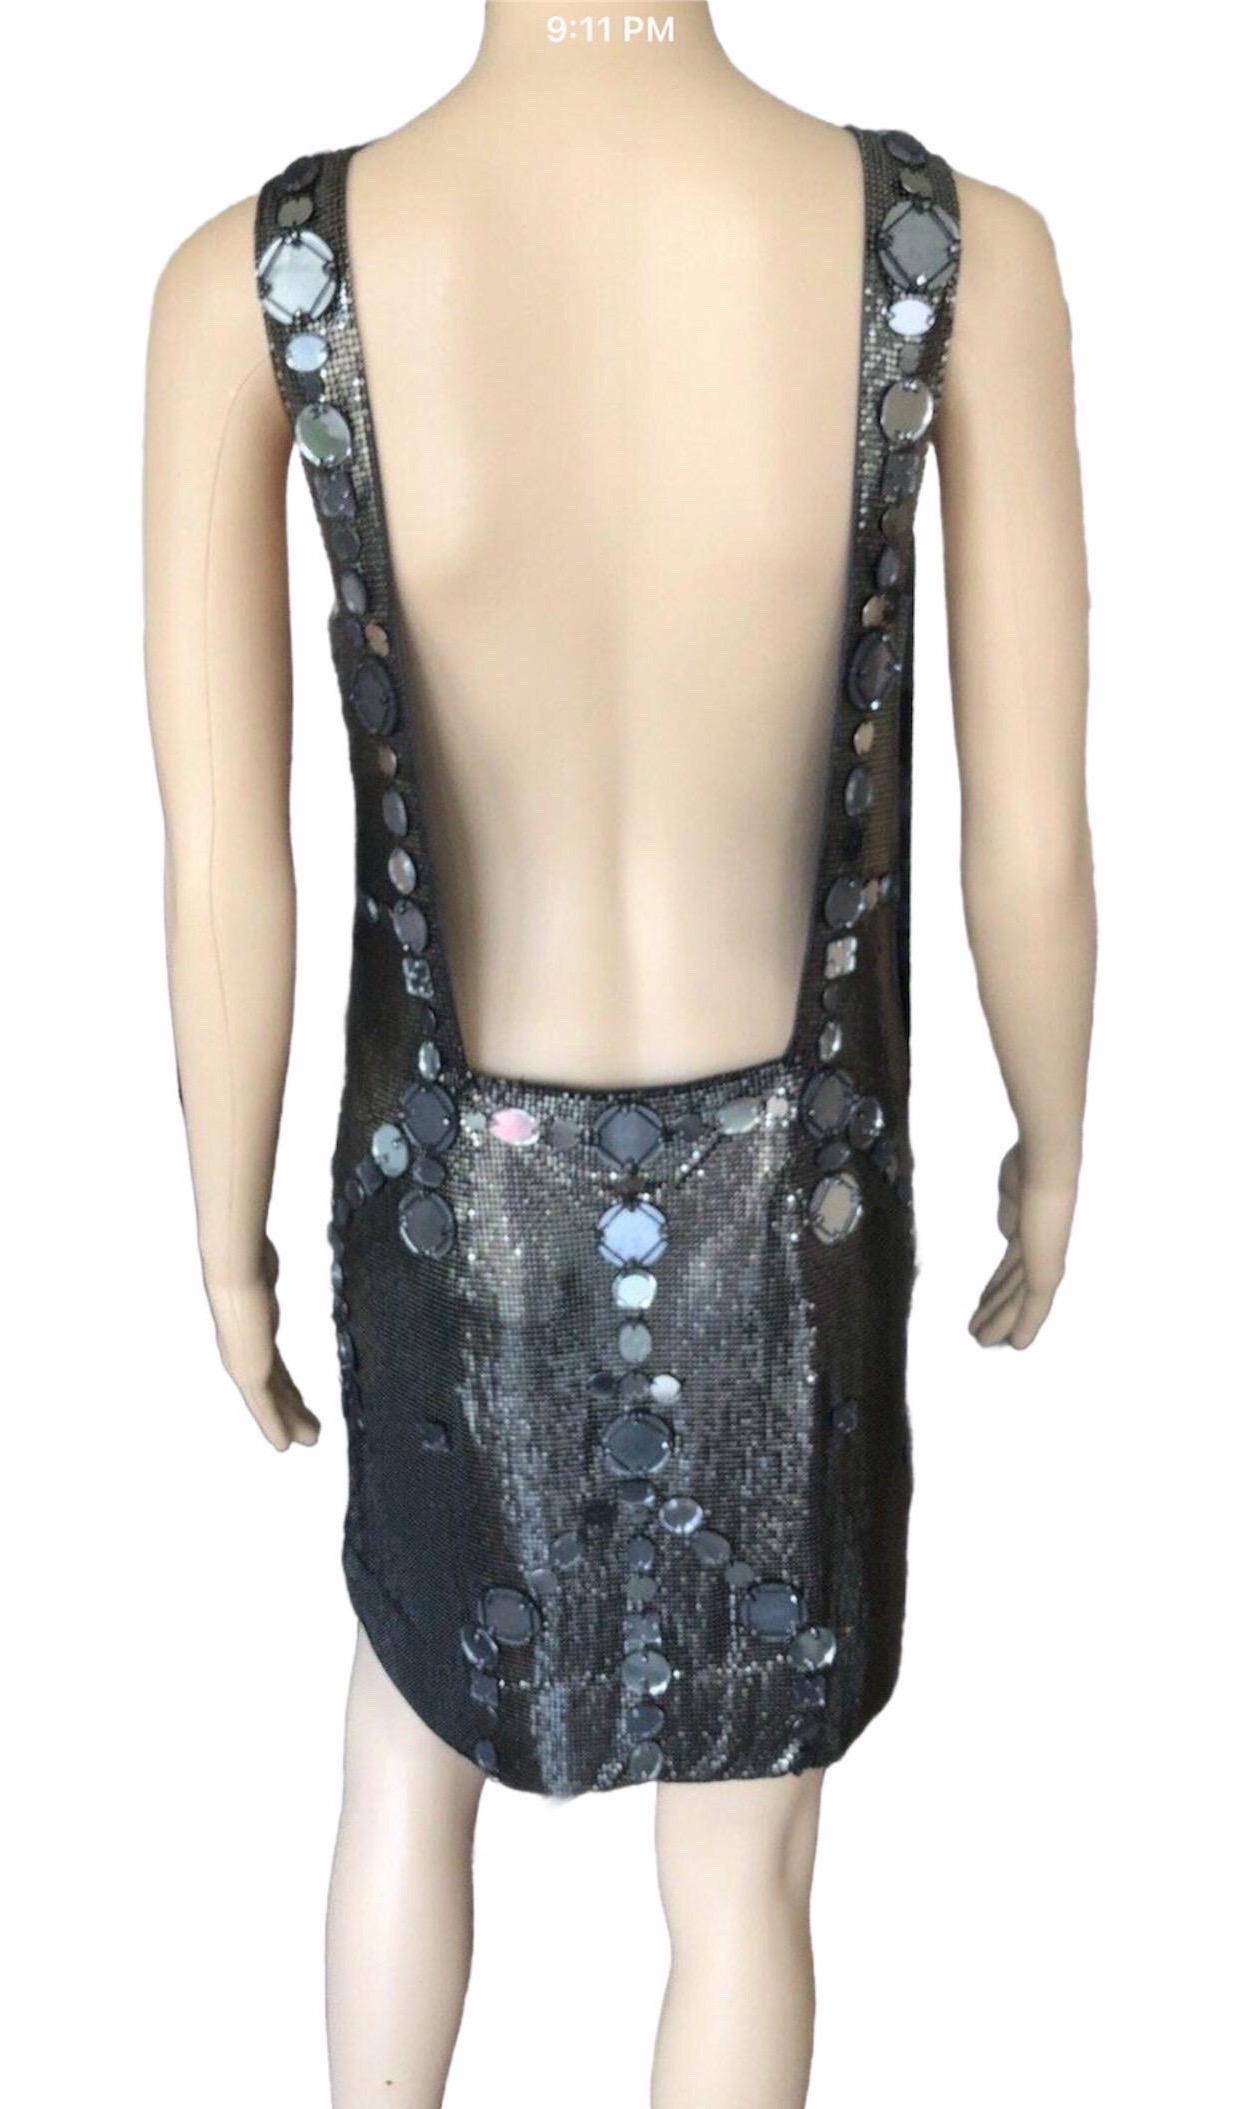 VERSACE Oroton Metal Mesh Open Back Dress

Gunmetal Versace Oroton Metal Mesh Chainmail dress with square neckline and low back.

About Versace: Founded in 1978 by the late Gianni Versace, this Italian design house specializes in sizzling glamour.